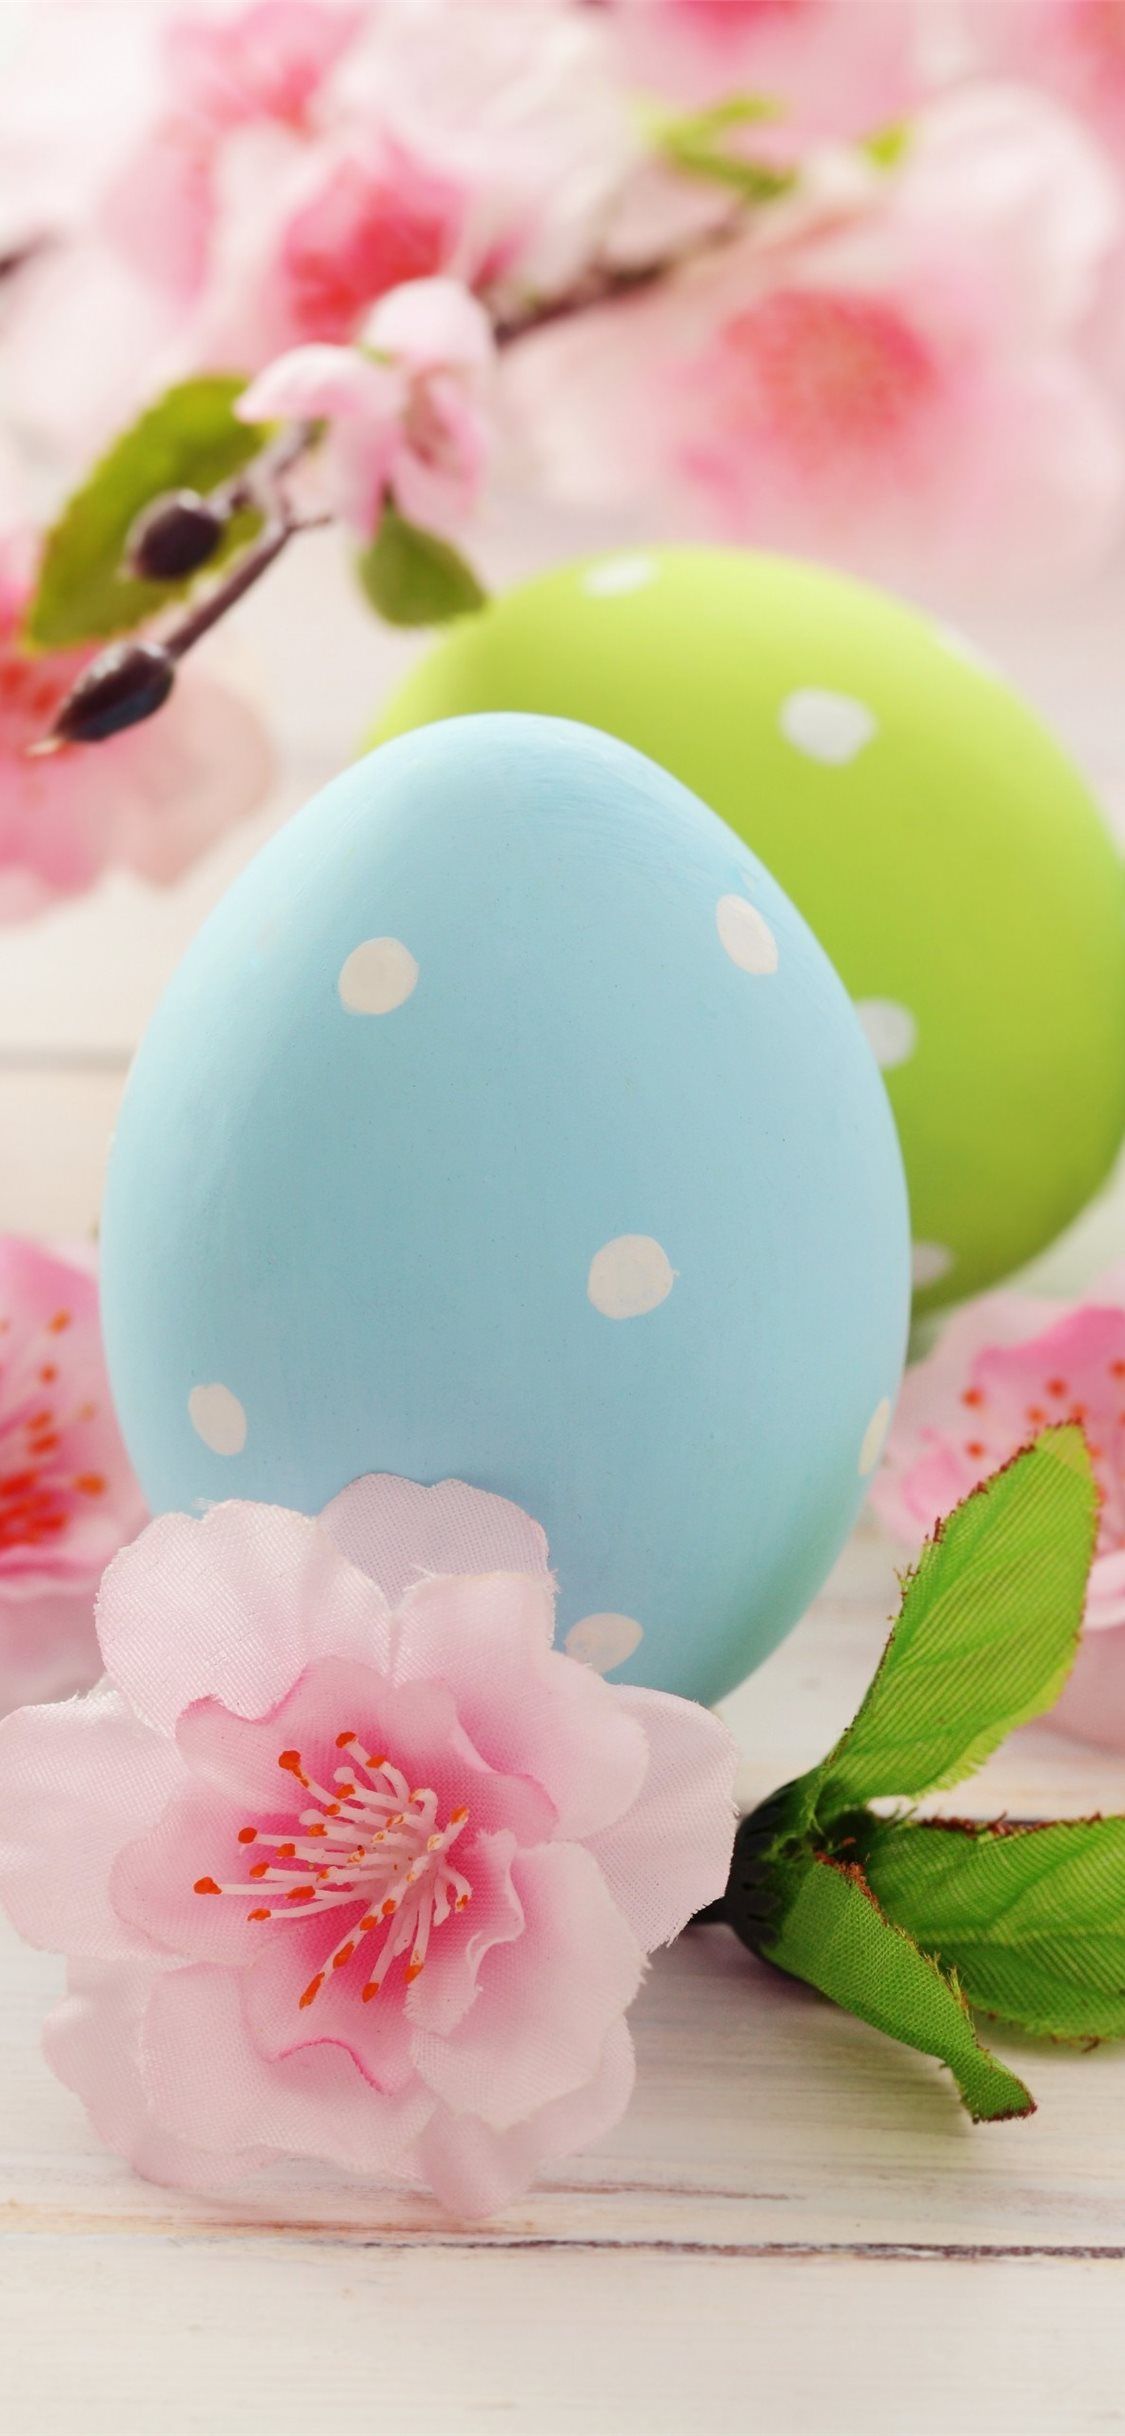 Free Easter Wallpapers Bunny  Egg Downloads for Desktop Android iPhone